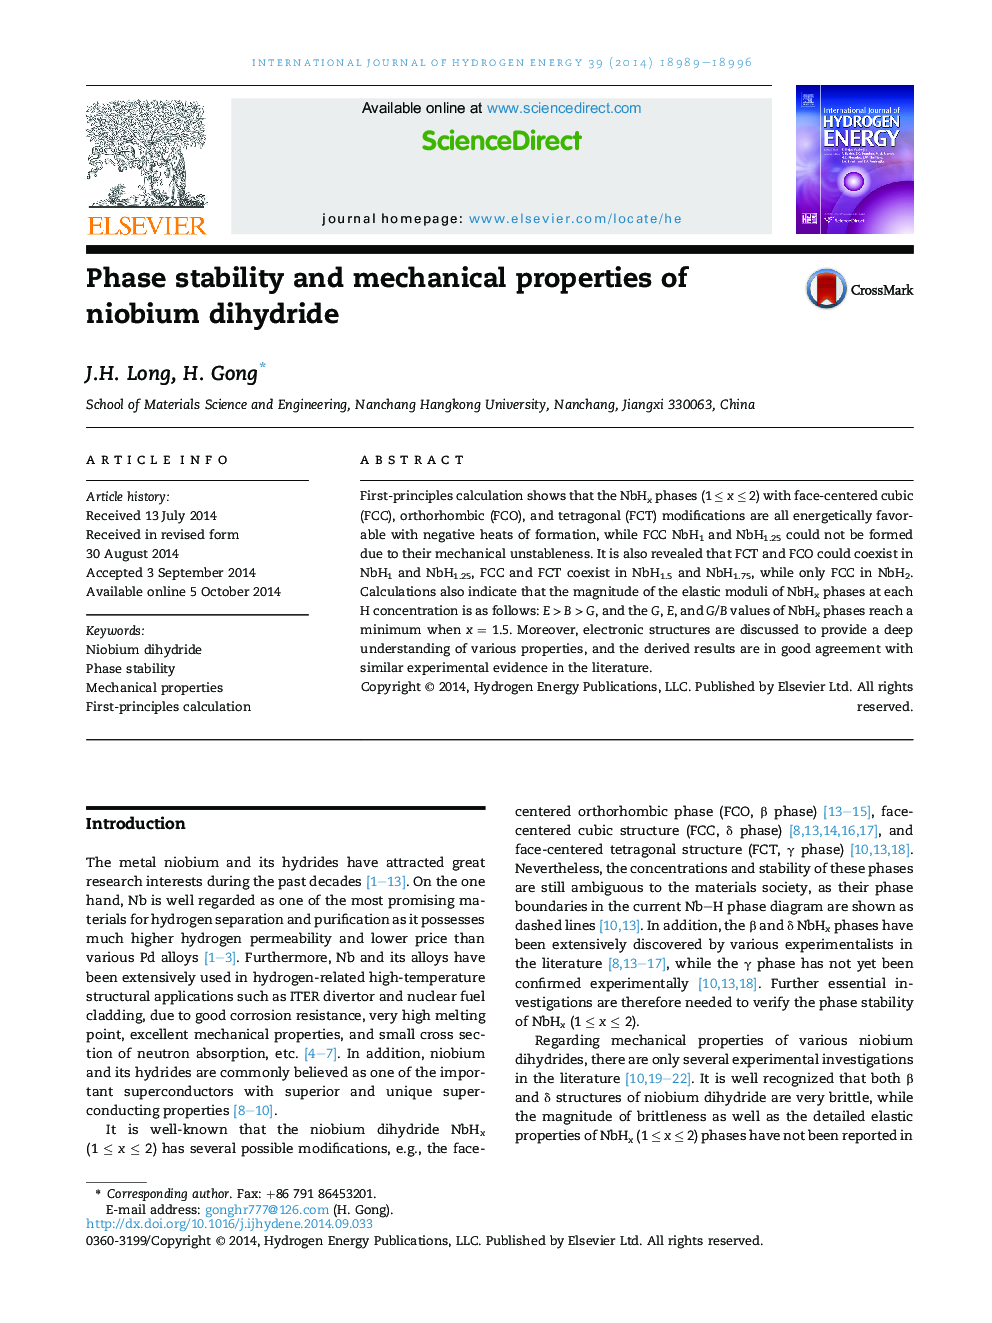 Phase stability and mechanical properties of niobium dihydride